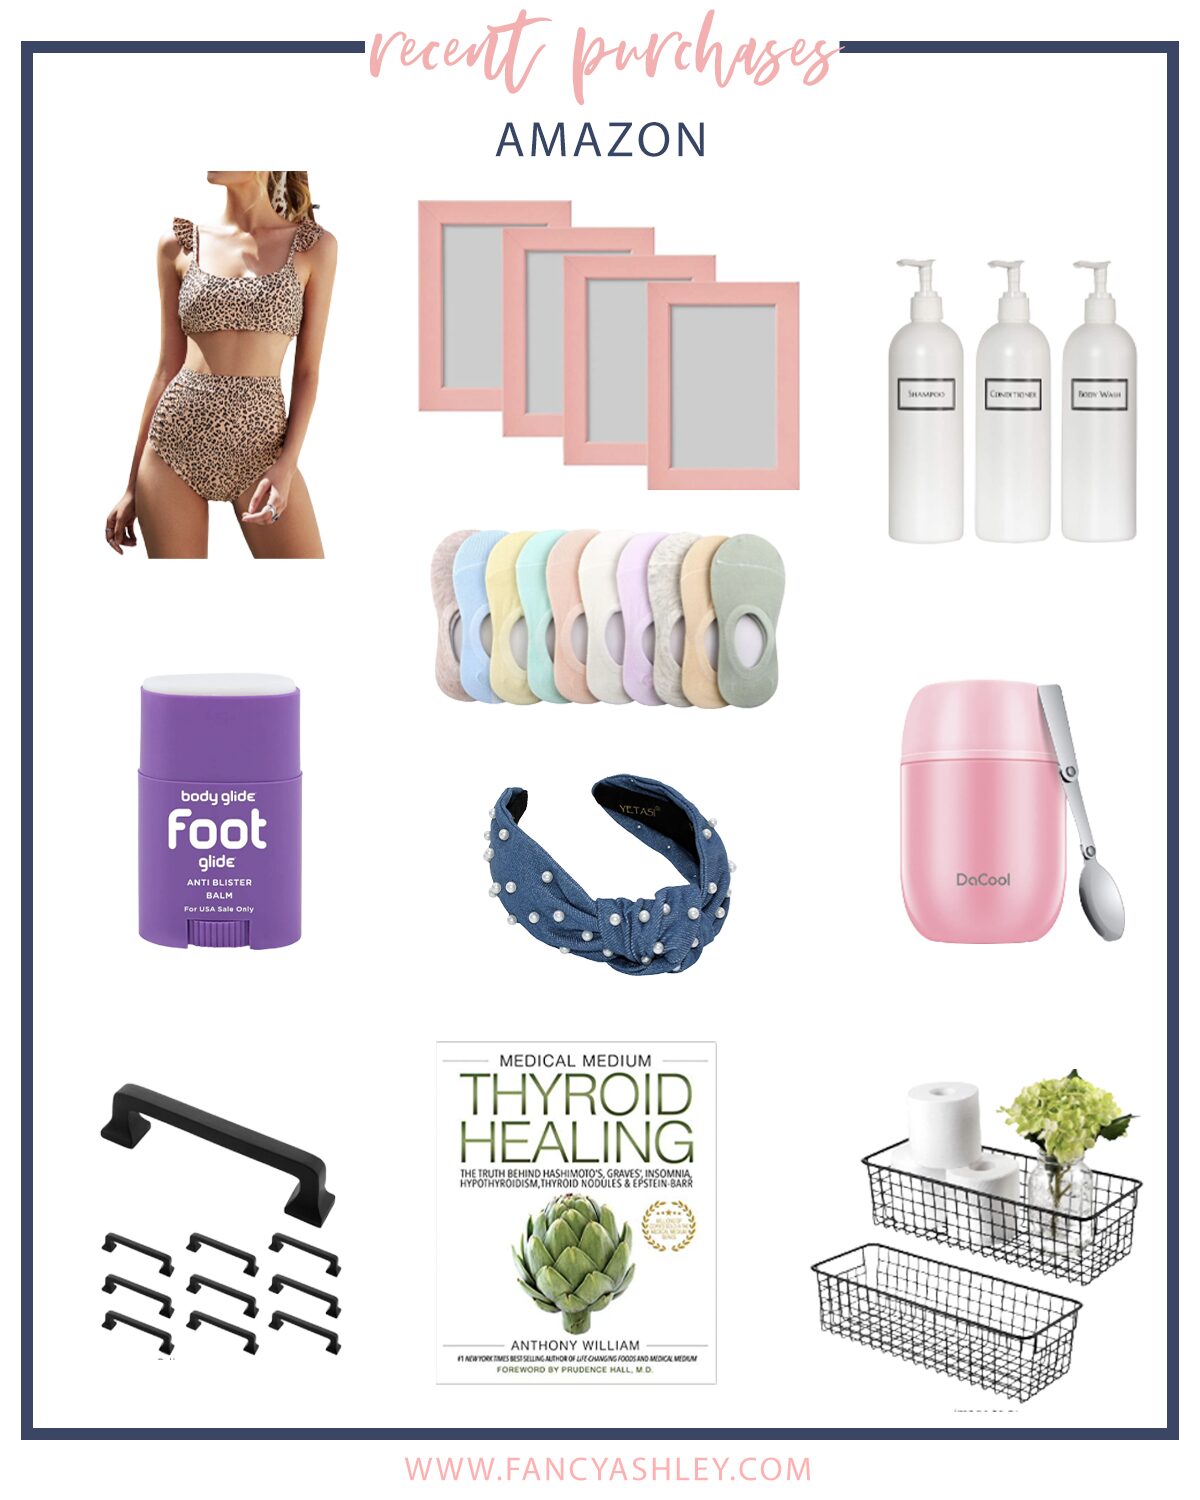 Recent Amazon Purchases by popular Houston fashion blog, The House of Fancy: collage image of a leopard print two piece swimsuit, pink picture frames, pearl knot headbands, drawer pulls, thyroid healing books, black metal wire baskets, travel spoon, crew socks, shampoo bottle set, foot glide stick, and insulated lunch container.